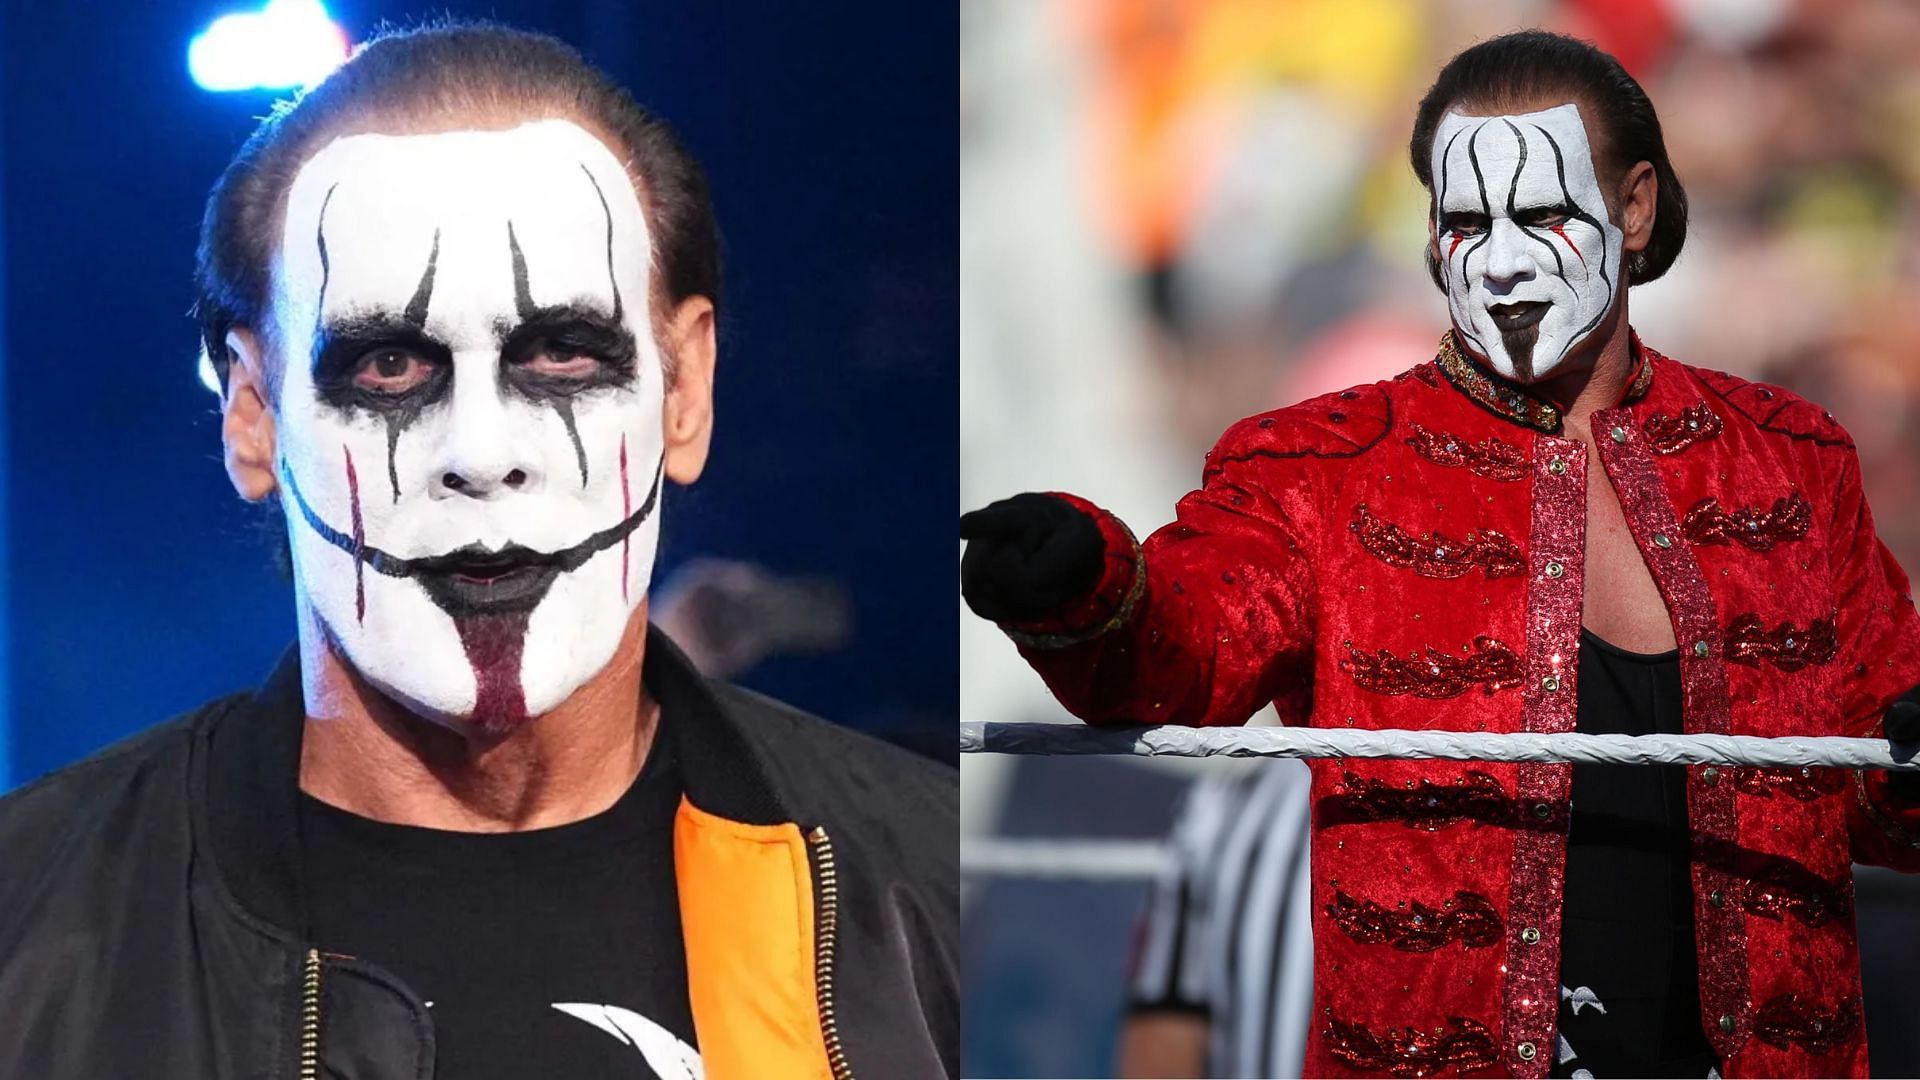 Have fans lost faith in Sting?